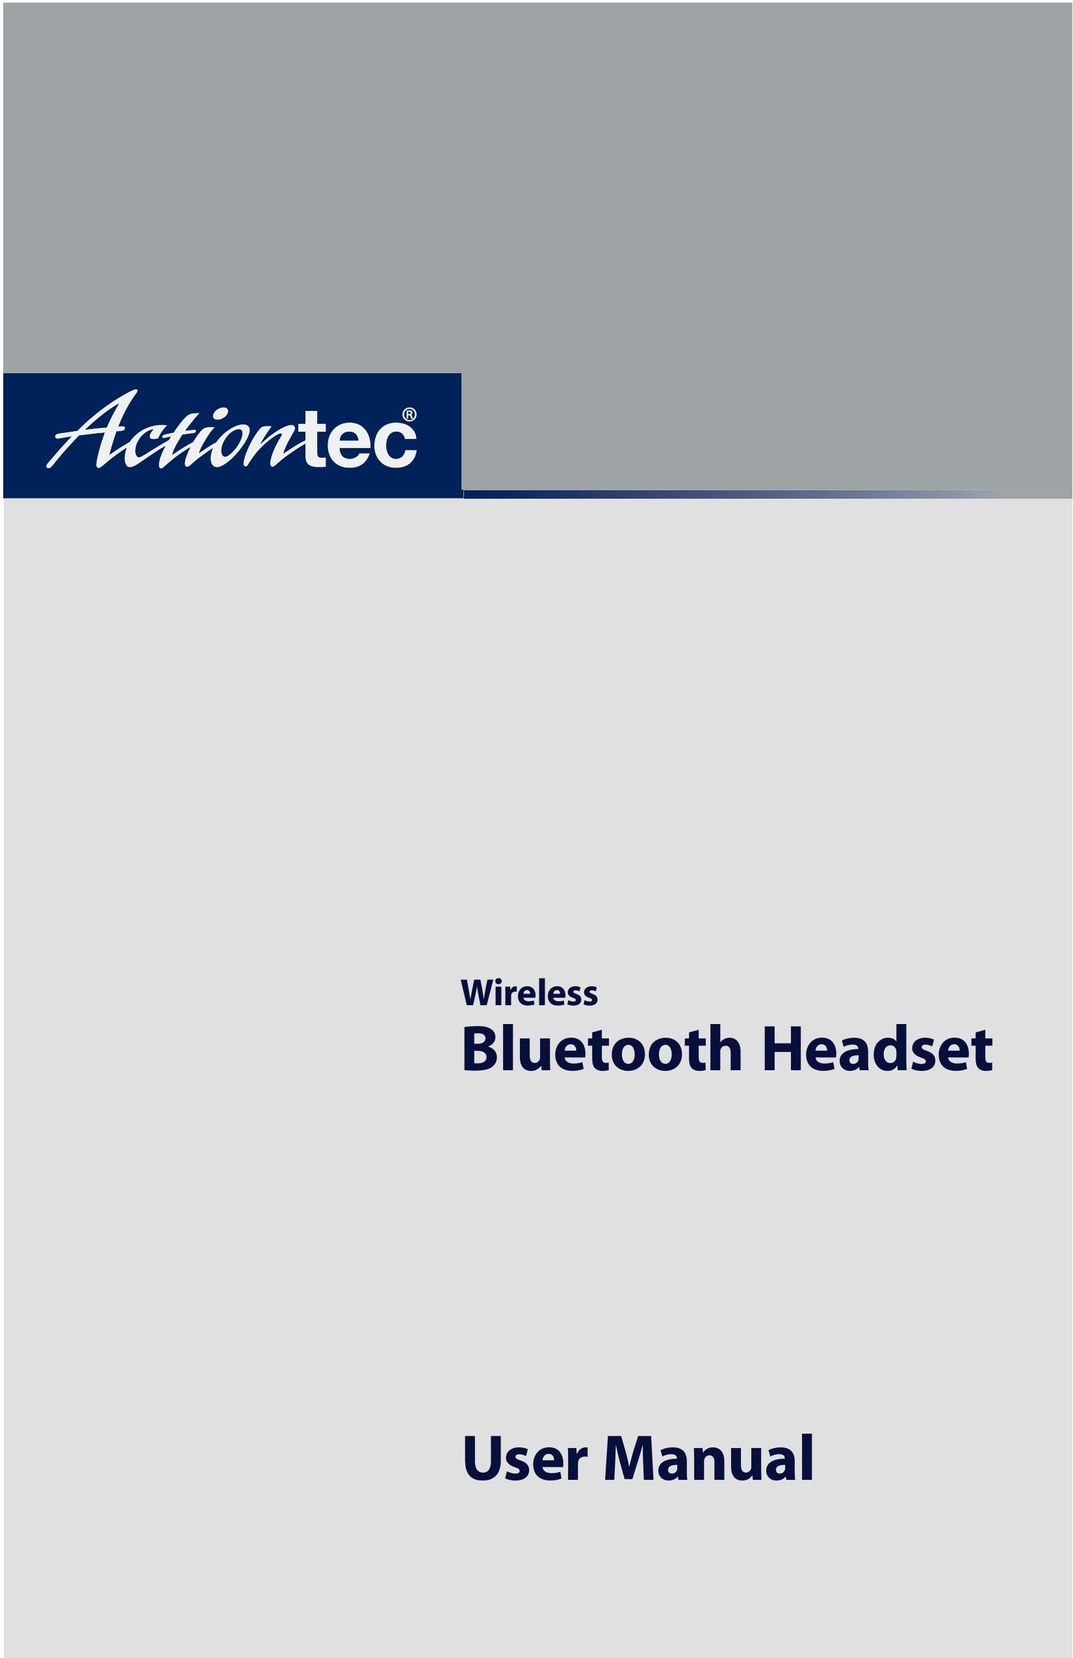 Actiontec electronic BTHS-6023 Bluetooth Headset User Manual